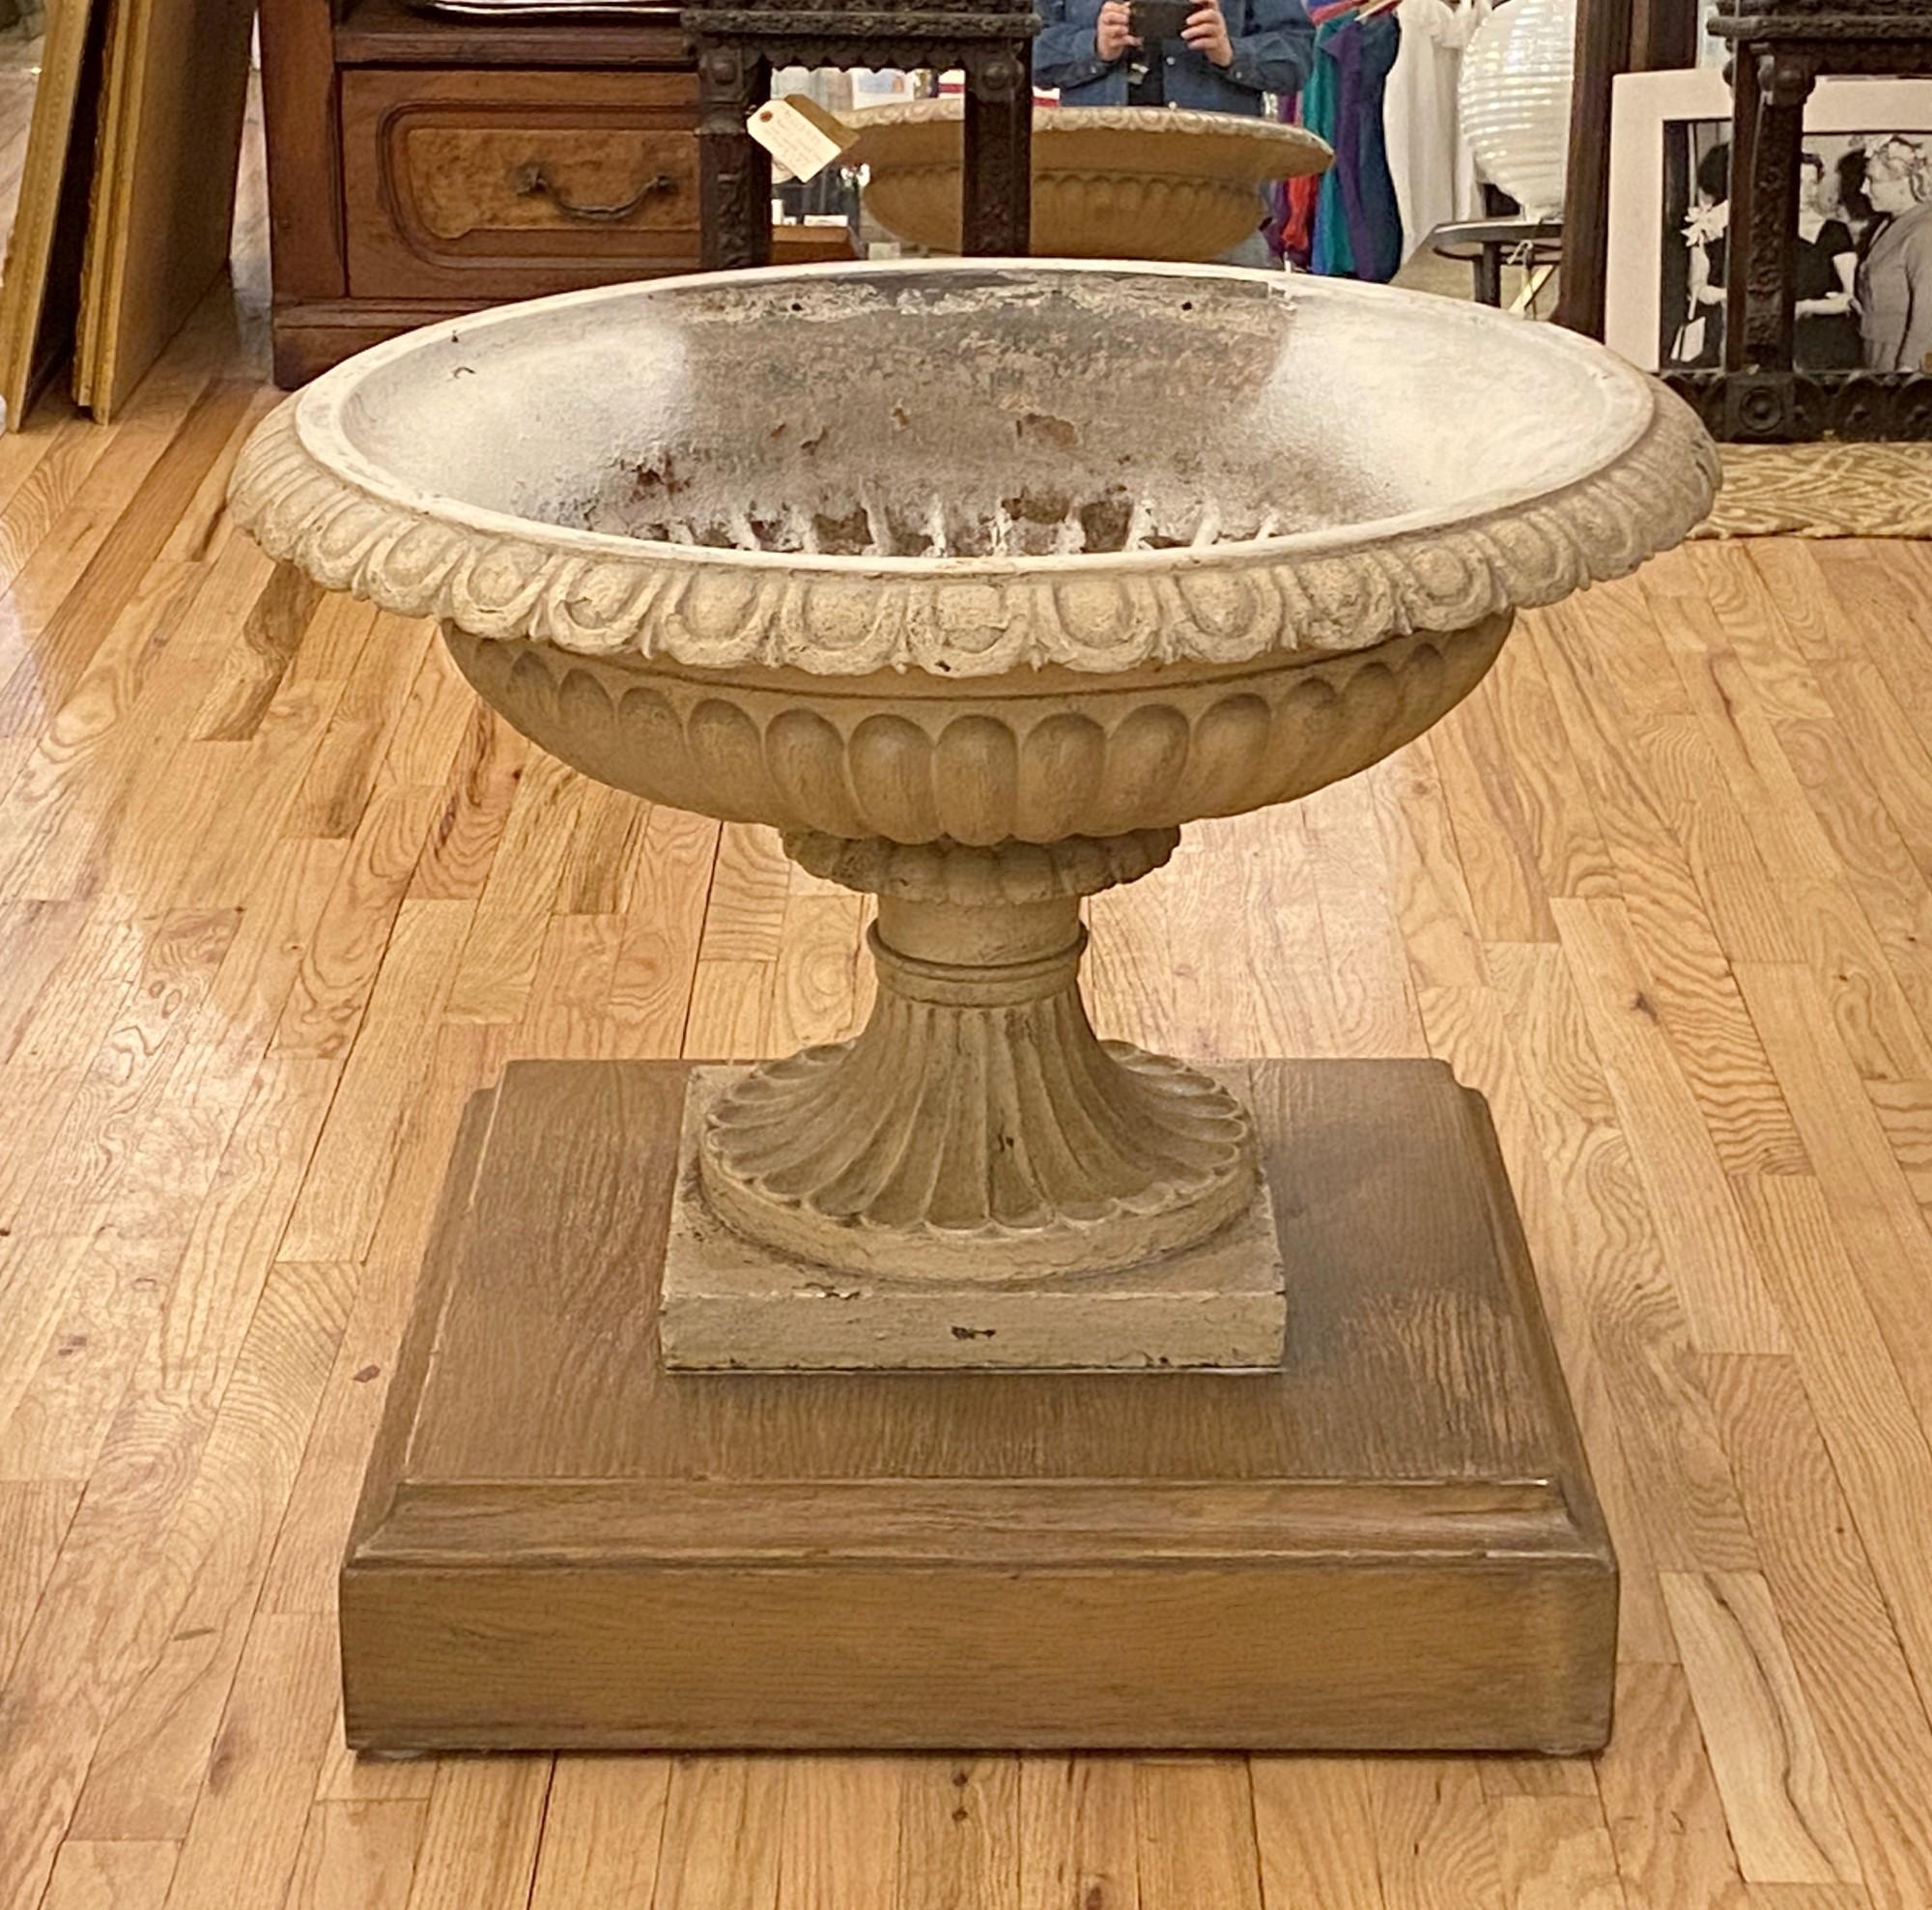 Retrieved from a Manhattan backyard garden, this 1940s antique cast iron urn or planter rests on a removable custom made wood platform. The planter features an egg and dart trim around the rim the fluted bowl has a drain hole. Original patina.